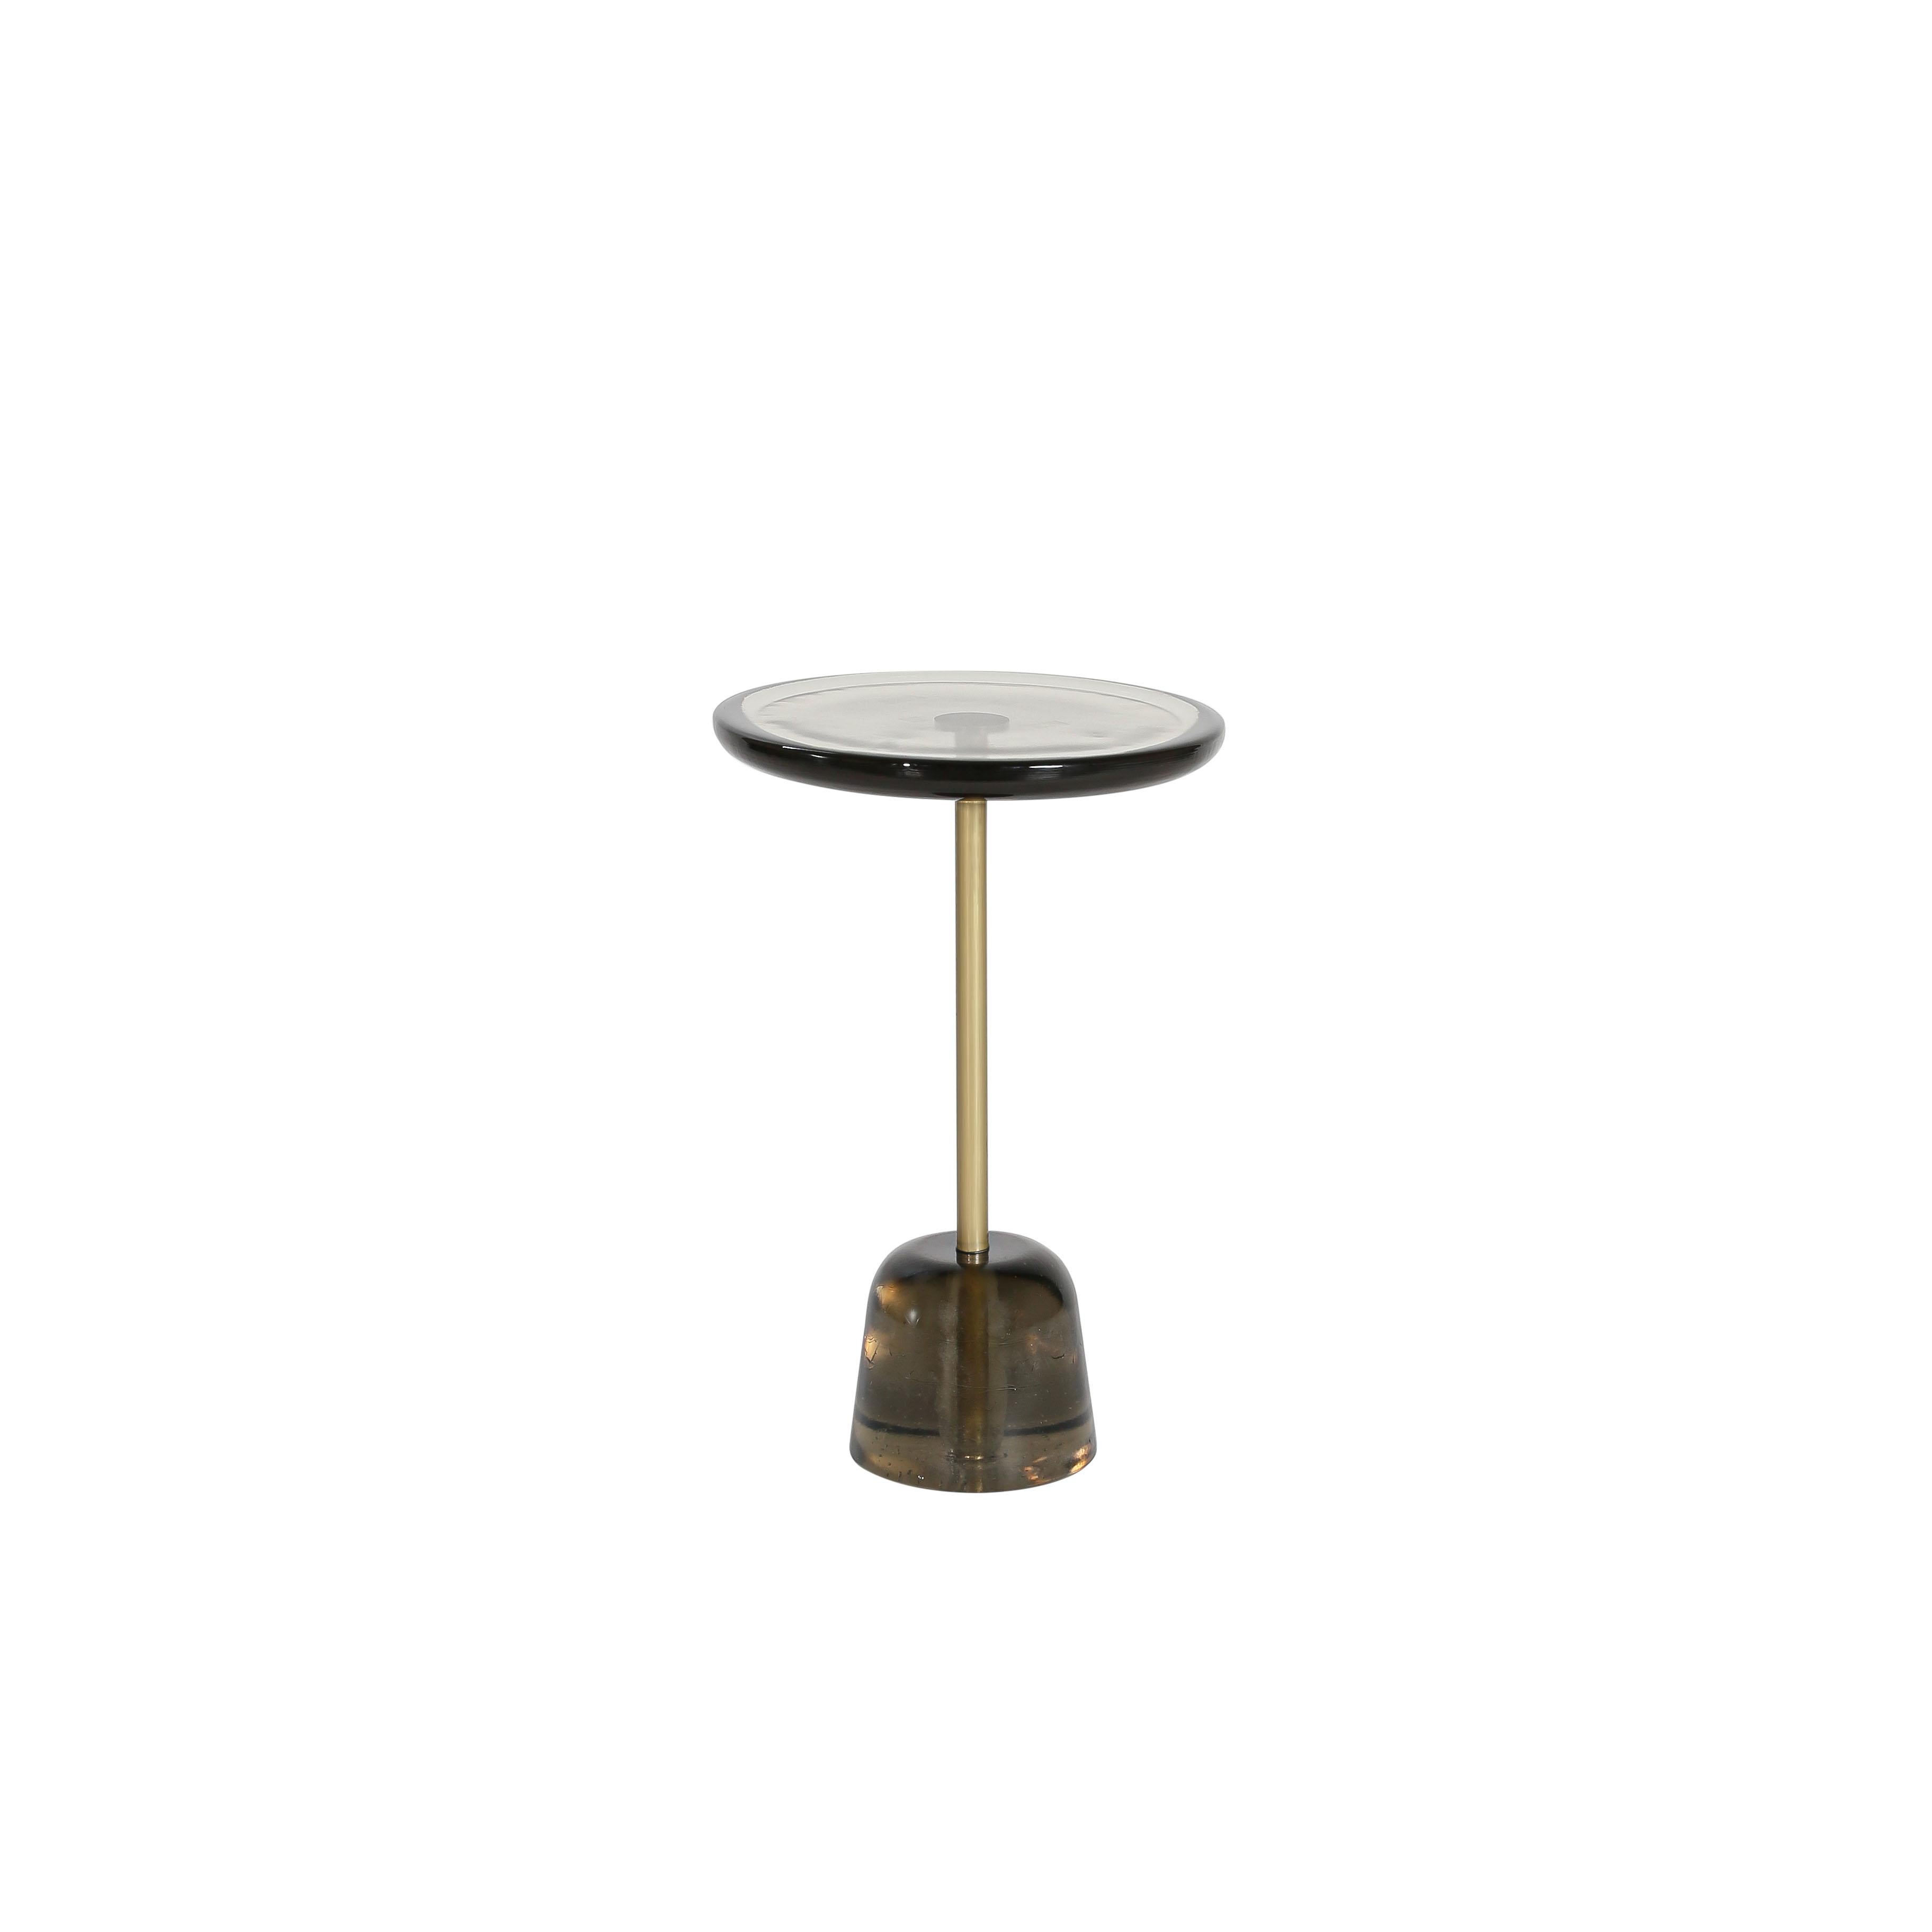 Pina high light grey brass side table by Pulpo
Dimensions: D 34 x H 52 cm
Materials: Glass; brass and steel.

Also available in different colours.

Sebastian Herkner’s distinctively tall, skinny side table series pina is inspired by the